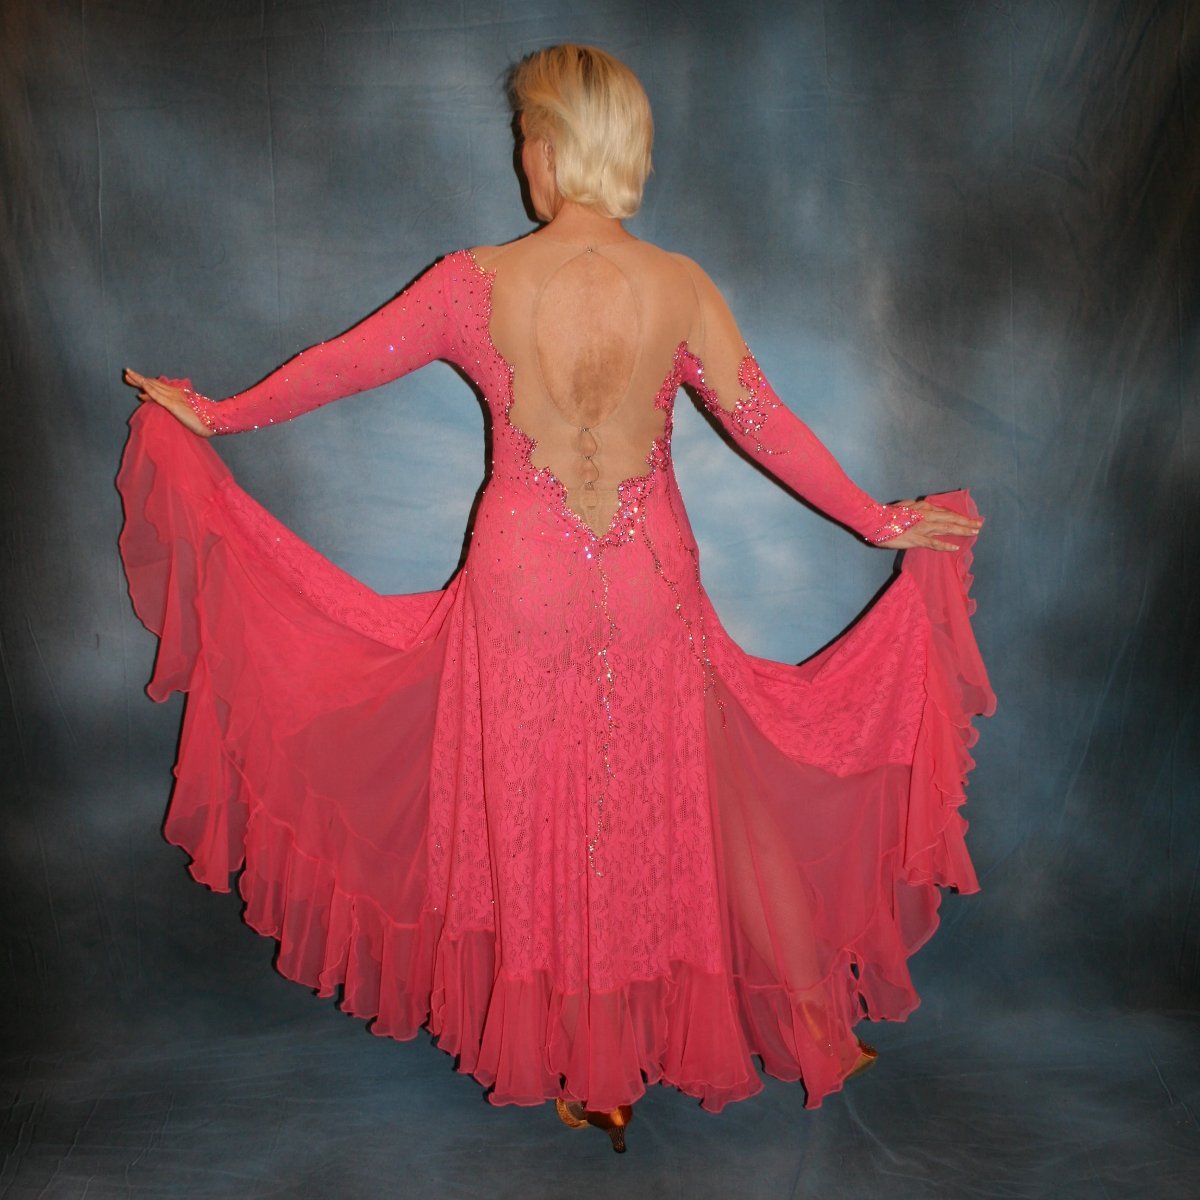 Crystal's Creations back view of Gorgeous salmon pink ballroom dance dress was created from salmon pink stretch lace on nude illusion base with yards & yards of salmon pink chiffon insets & flounces …